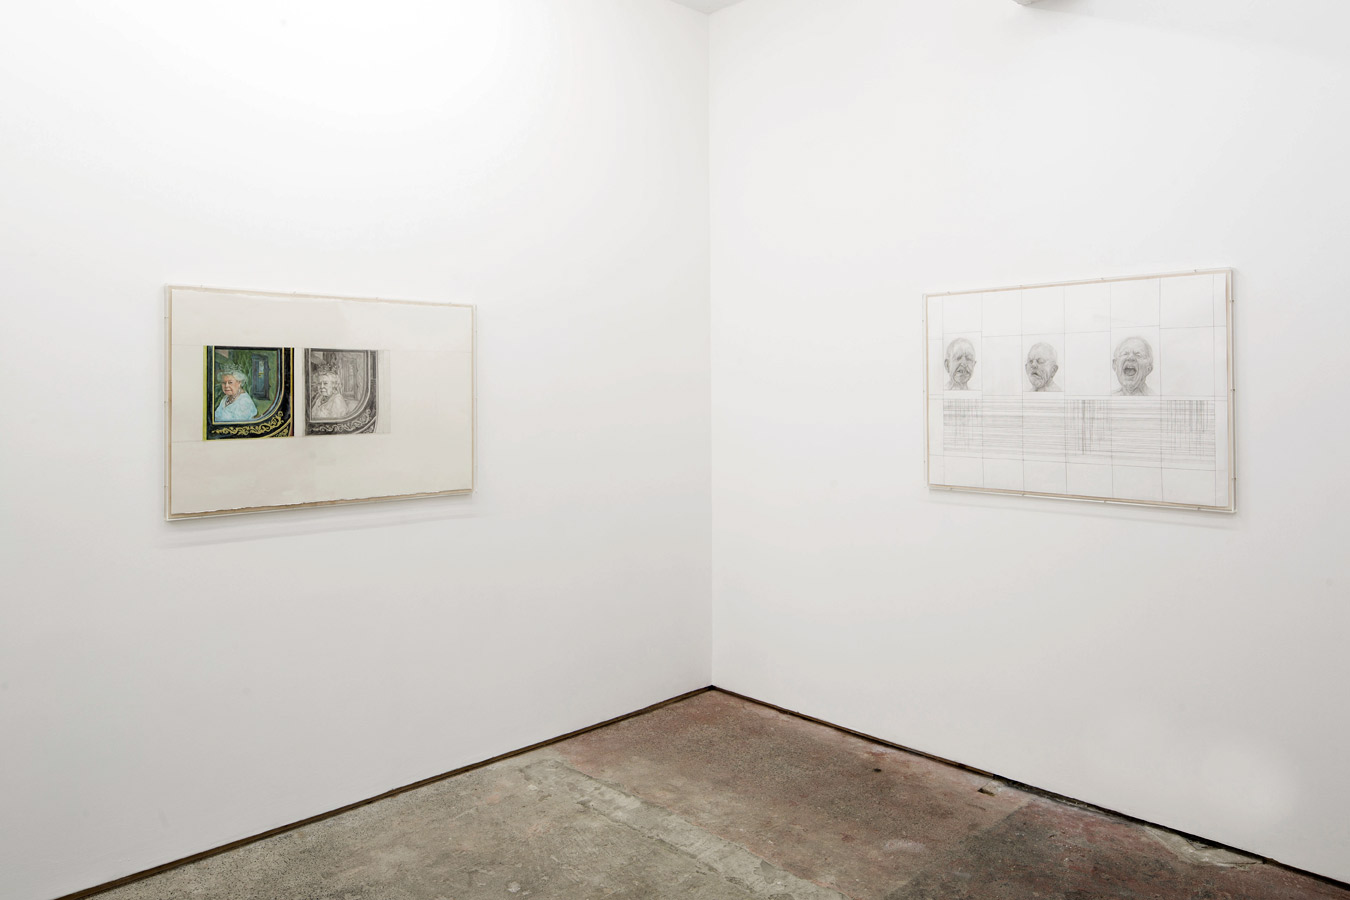 Stuart Brisley: Recent Paintings from the Museum of Ordure at Lungley gallery, London. (left to right; State Occasion from The Museum of Ordure (2020); Heads from The Museum of Ordure (2020)